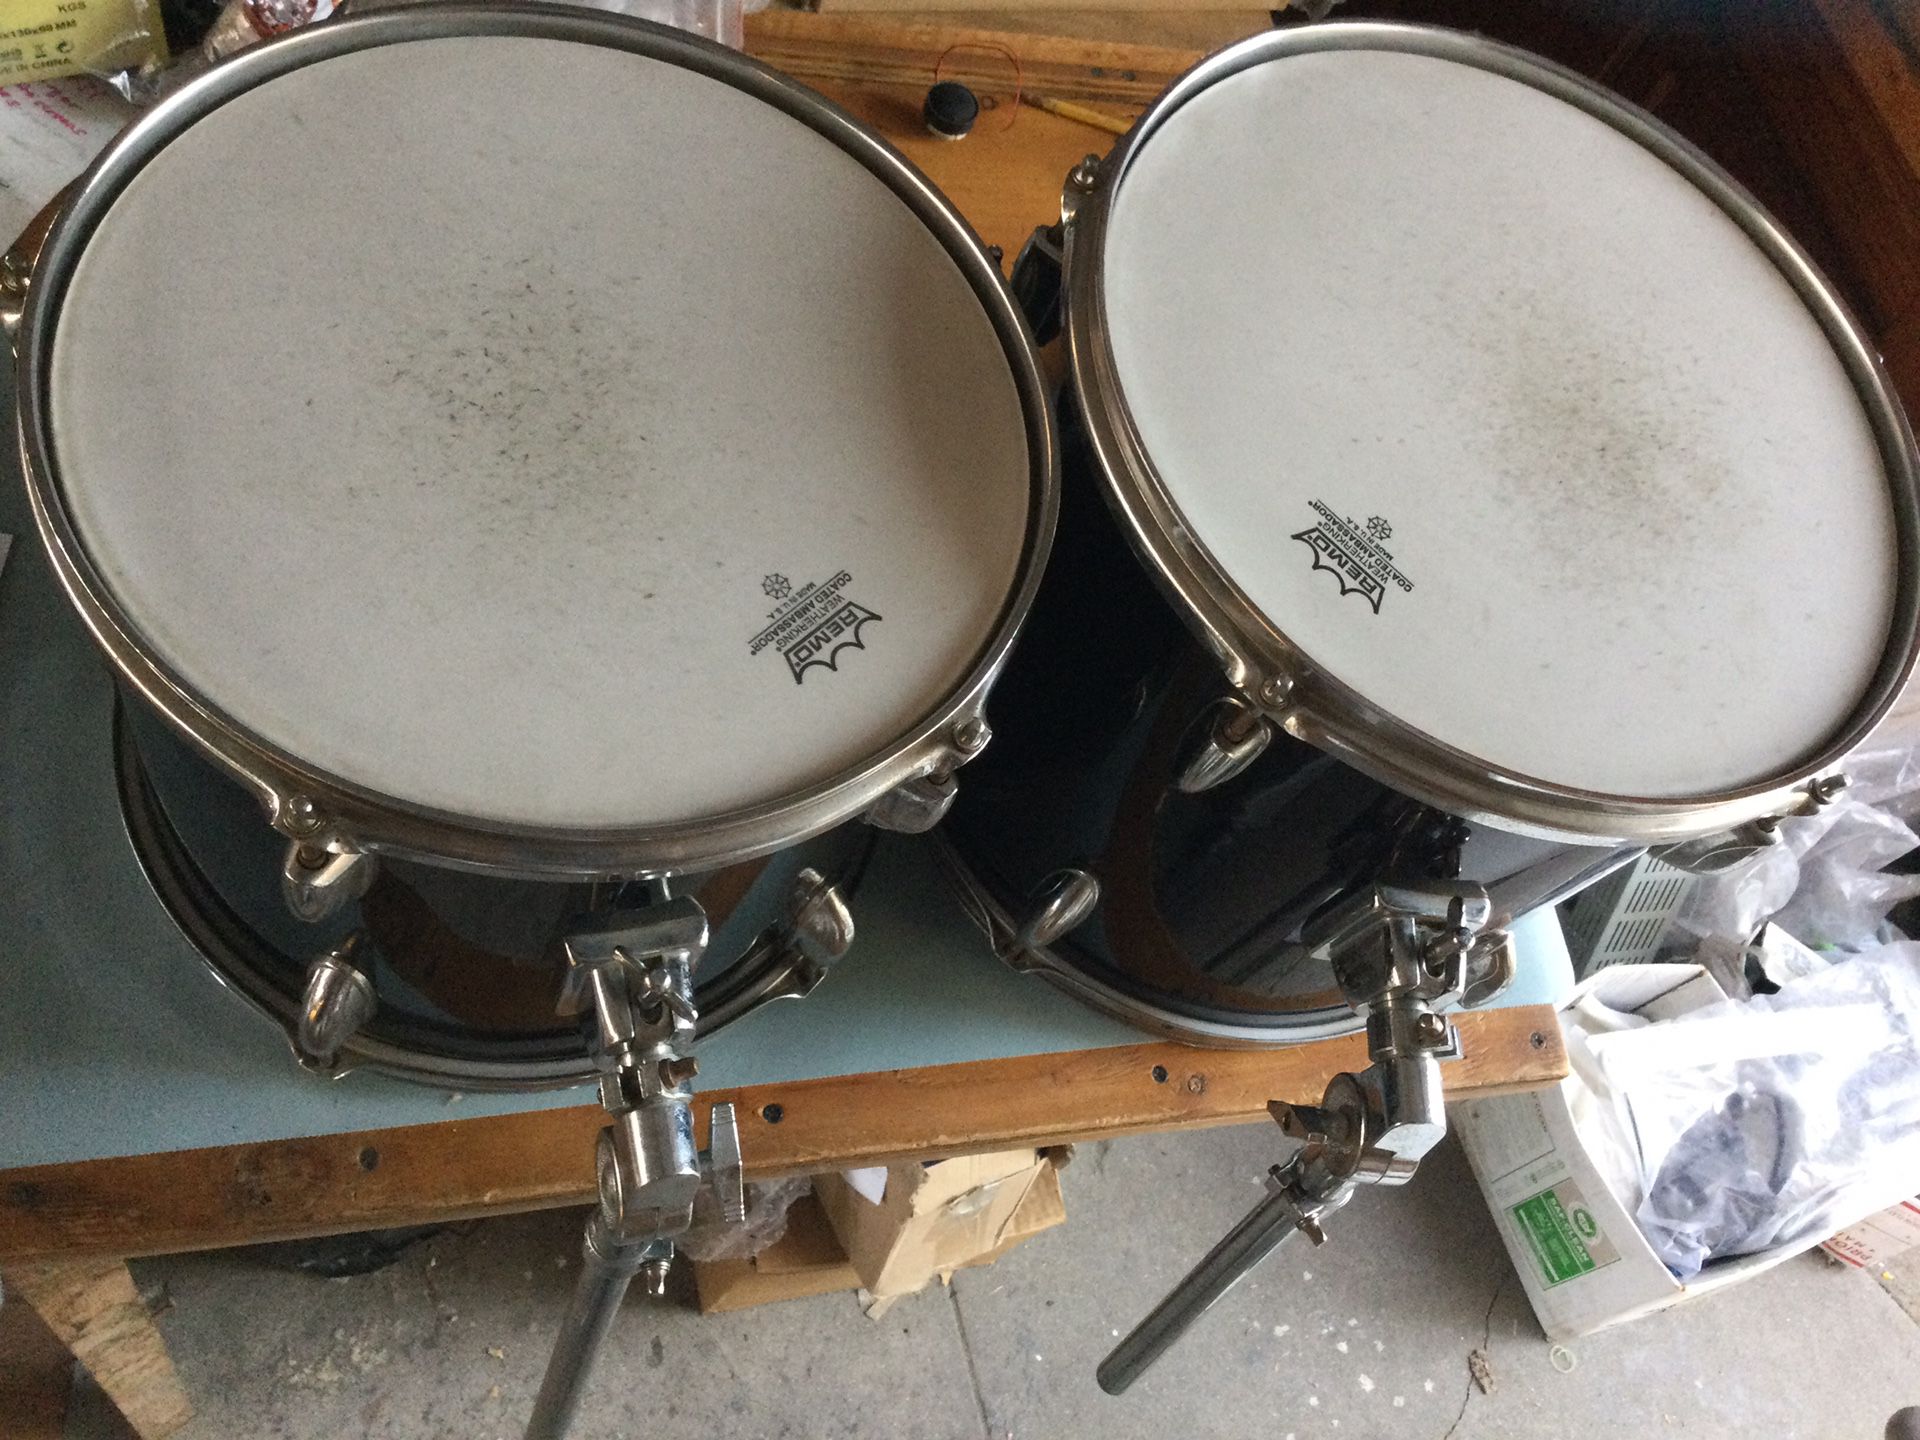 Pair Of Black Tom-Toms, For Drum Set. Ready To Be Mounted On Drum Set. W/ REMO weatherking Coated Embassador. $70 South Gate